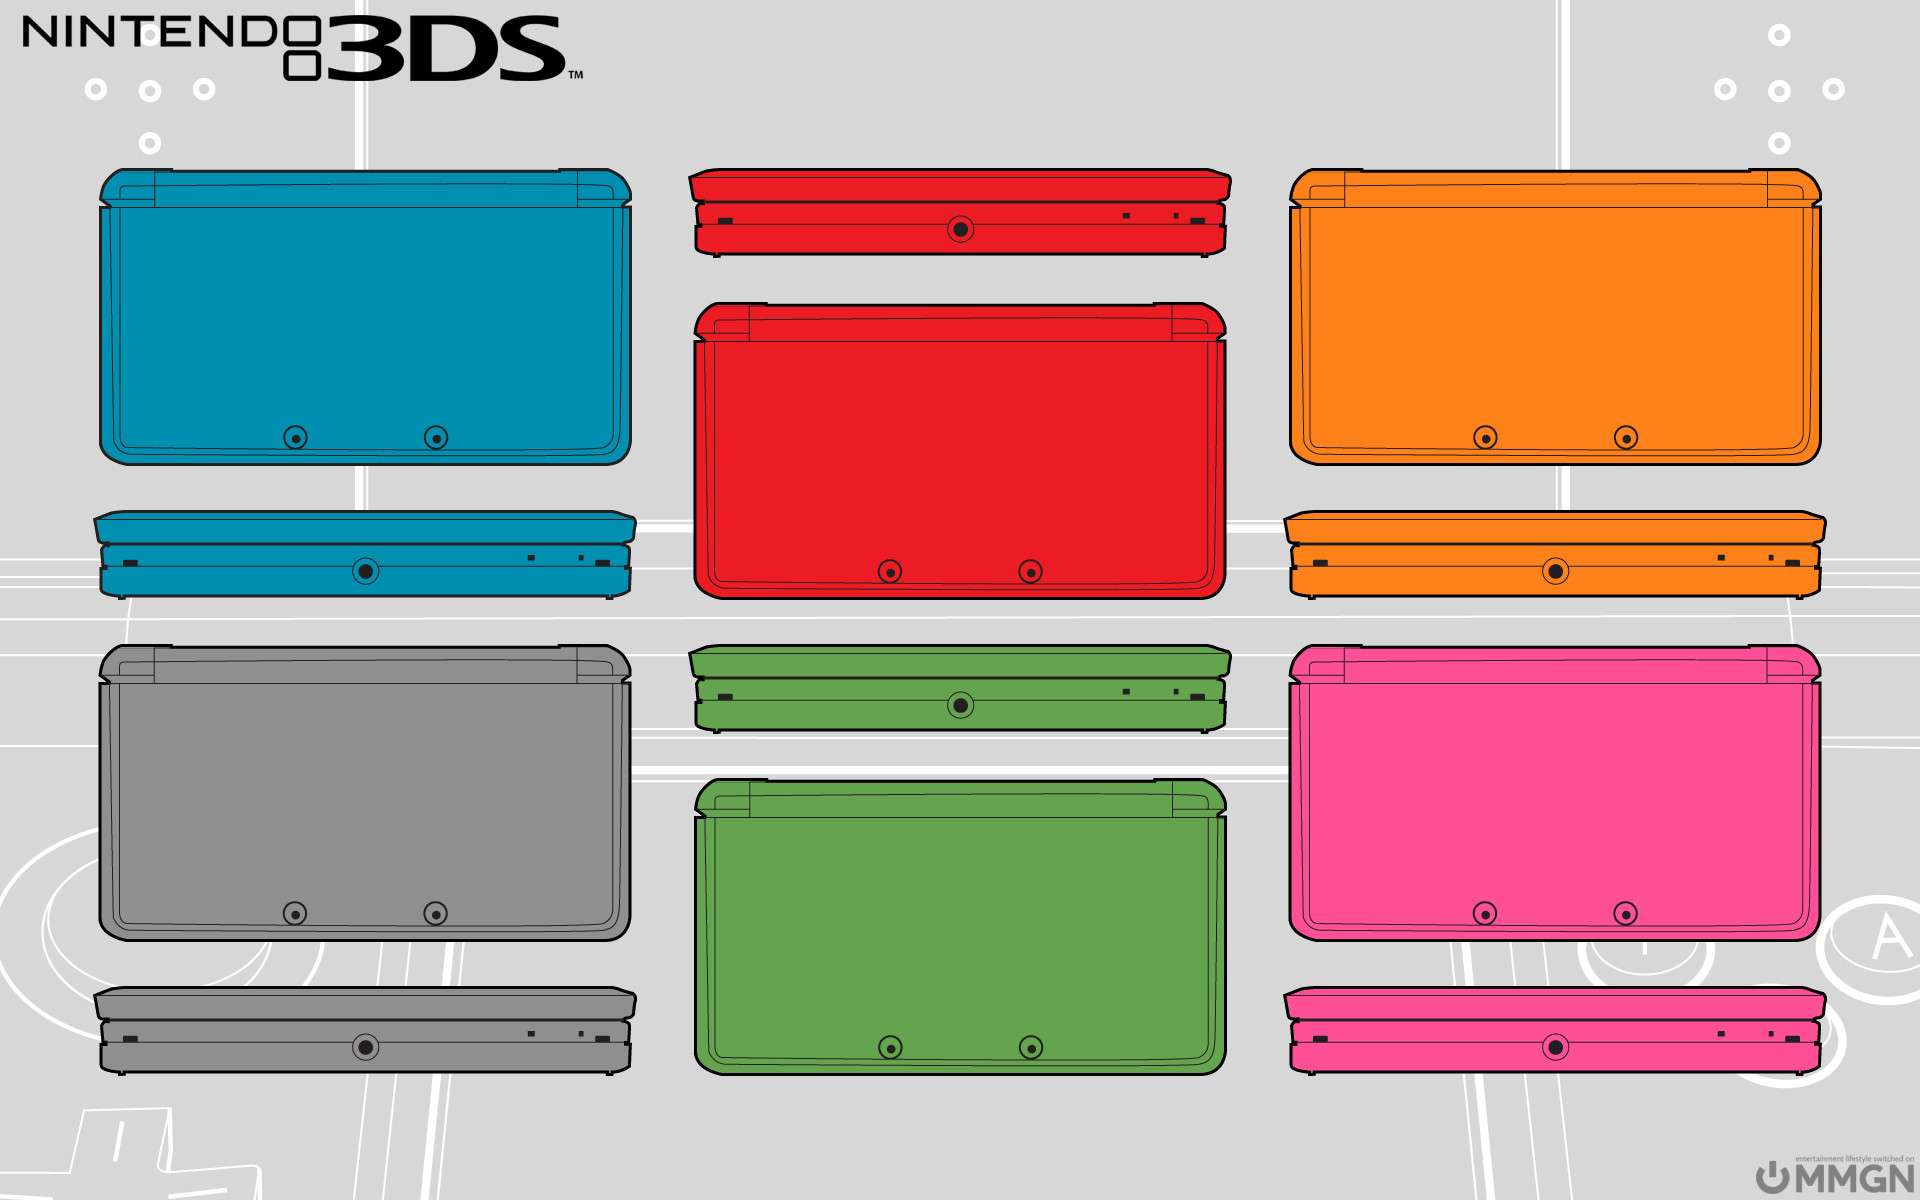 IPad and iPhone Nintendo 3DS Wallpapers